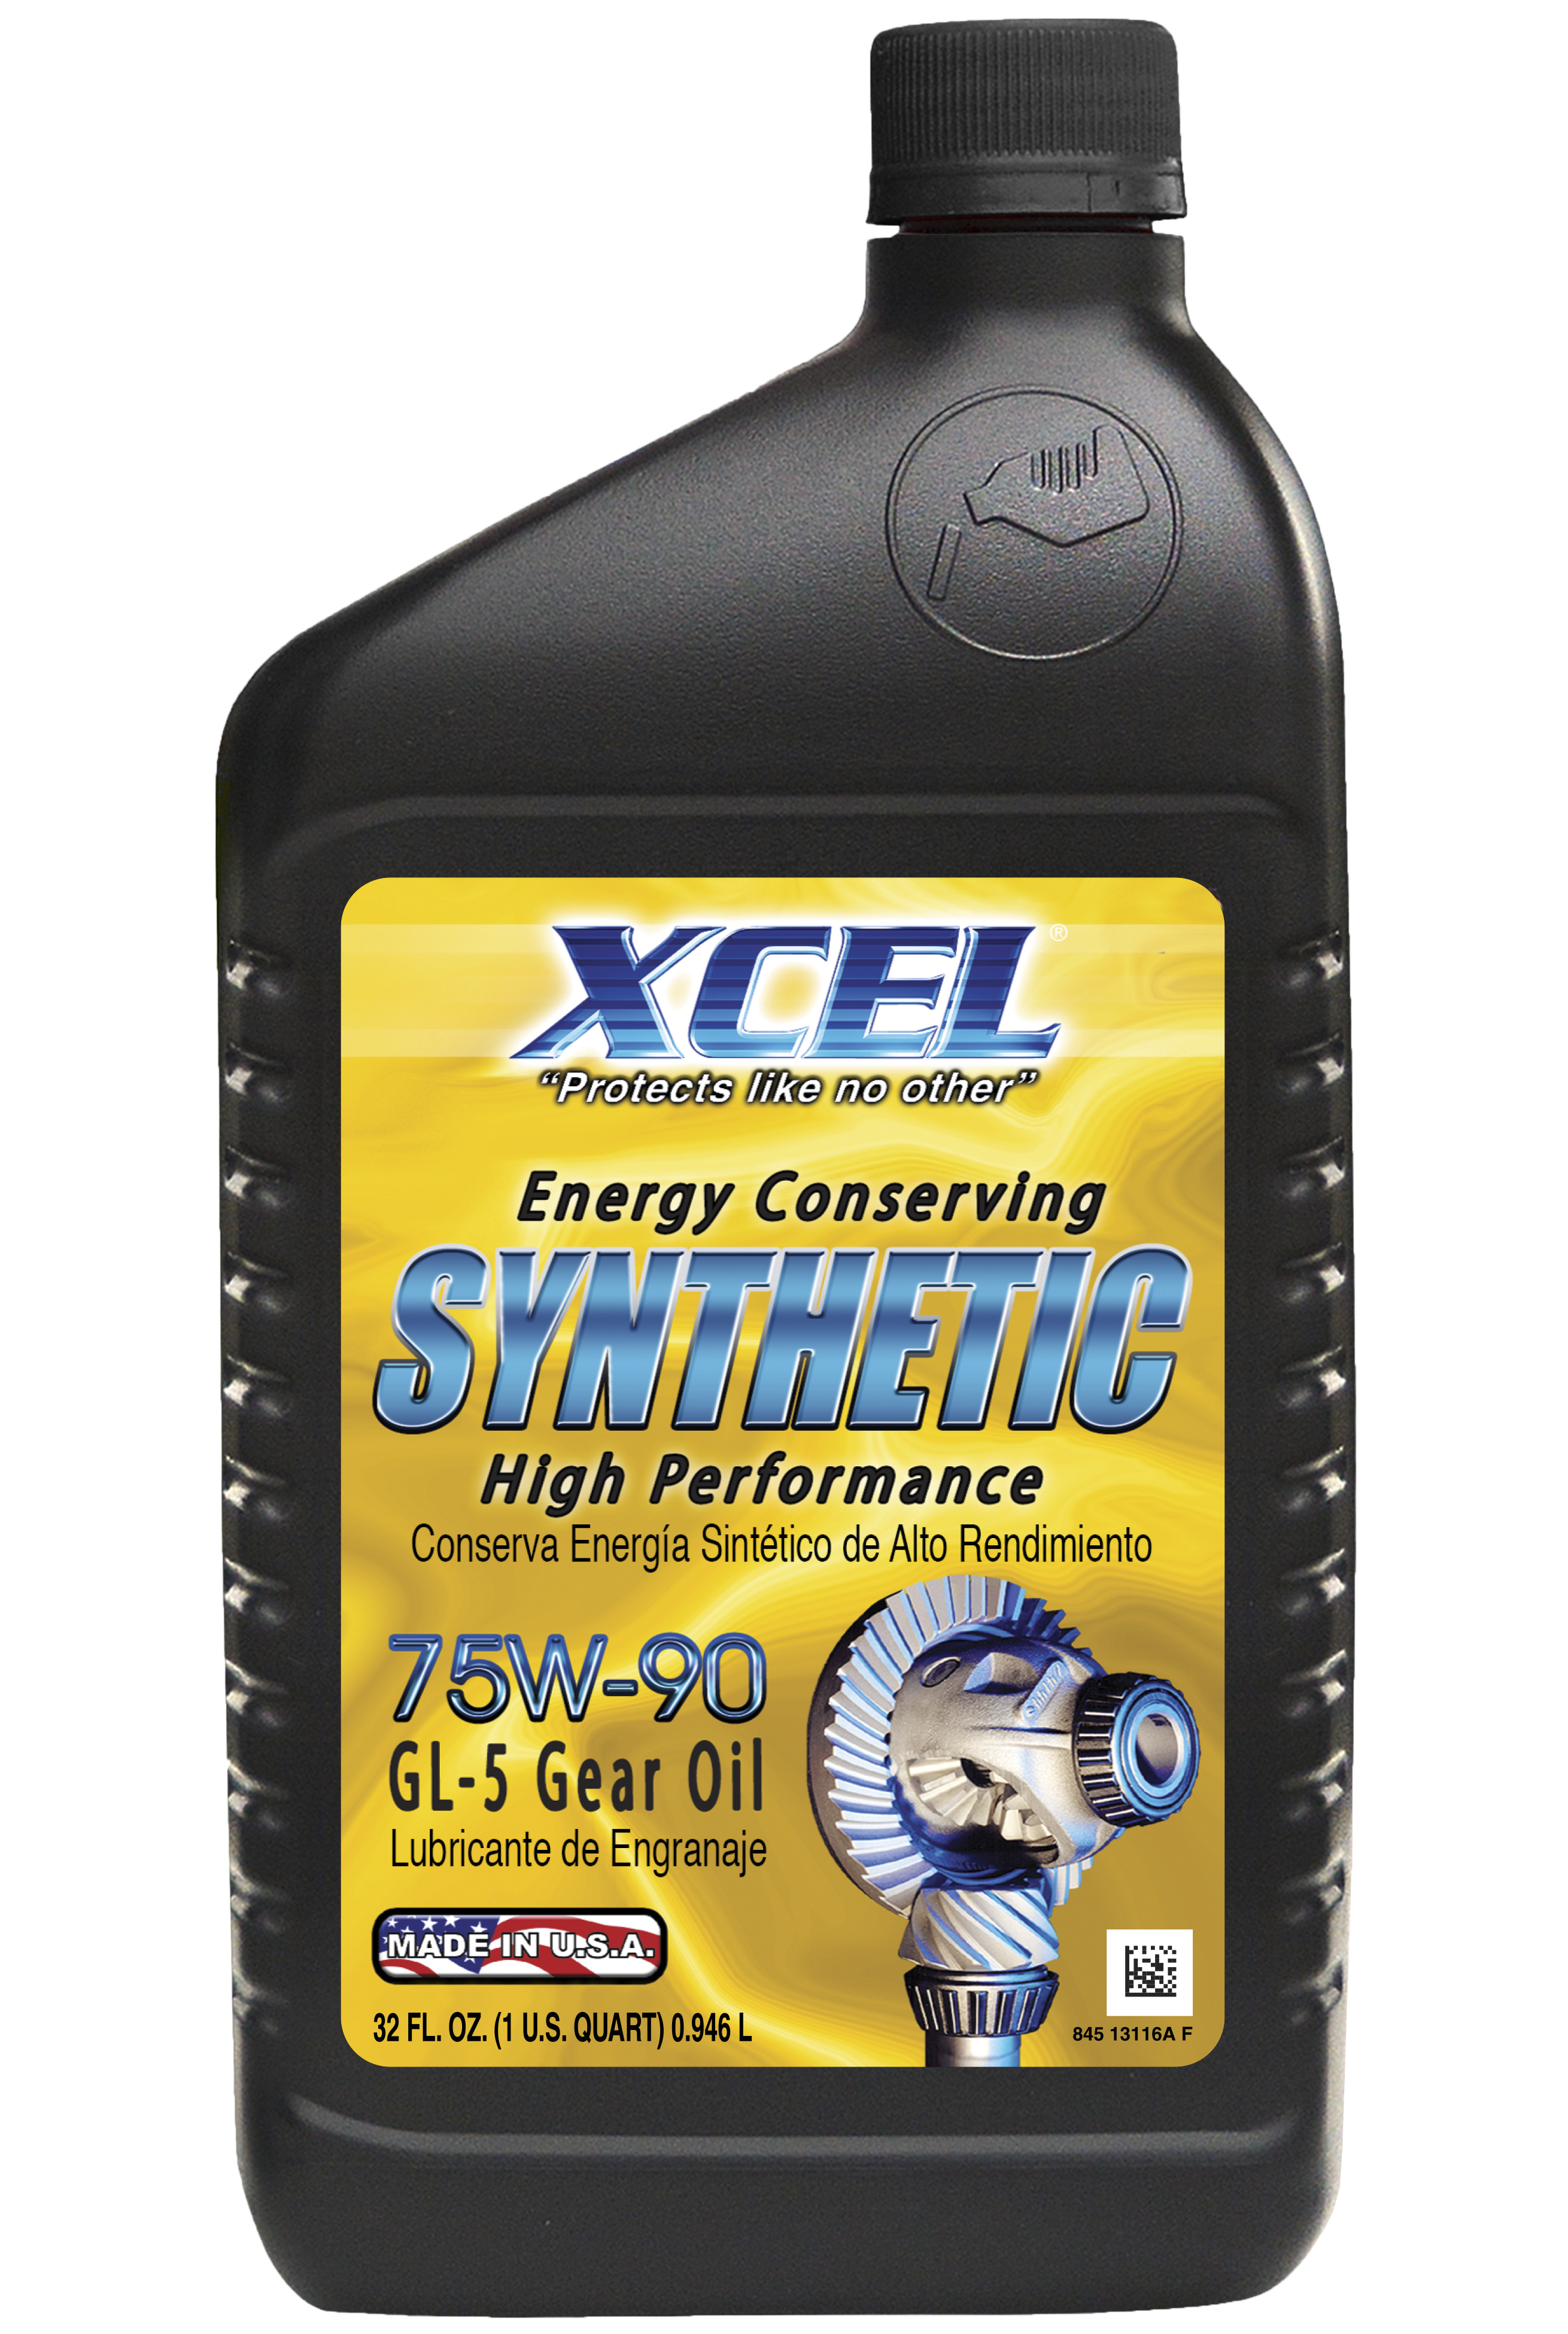 XCEL ENERGY CONSERVING SYNTHETIC HIGH PERFORMANCE GL-5 SAE 75W90